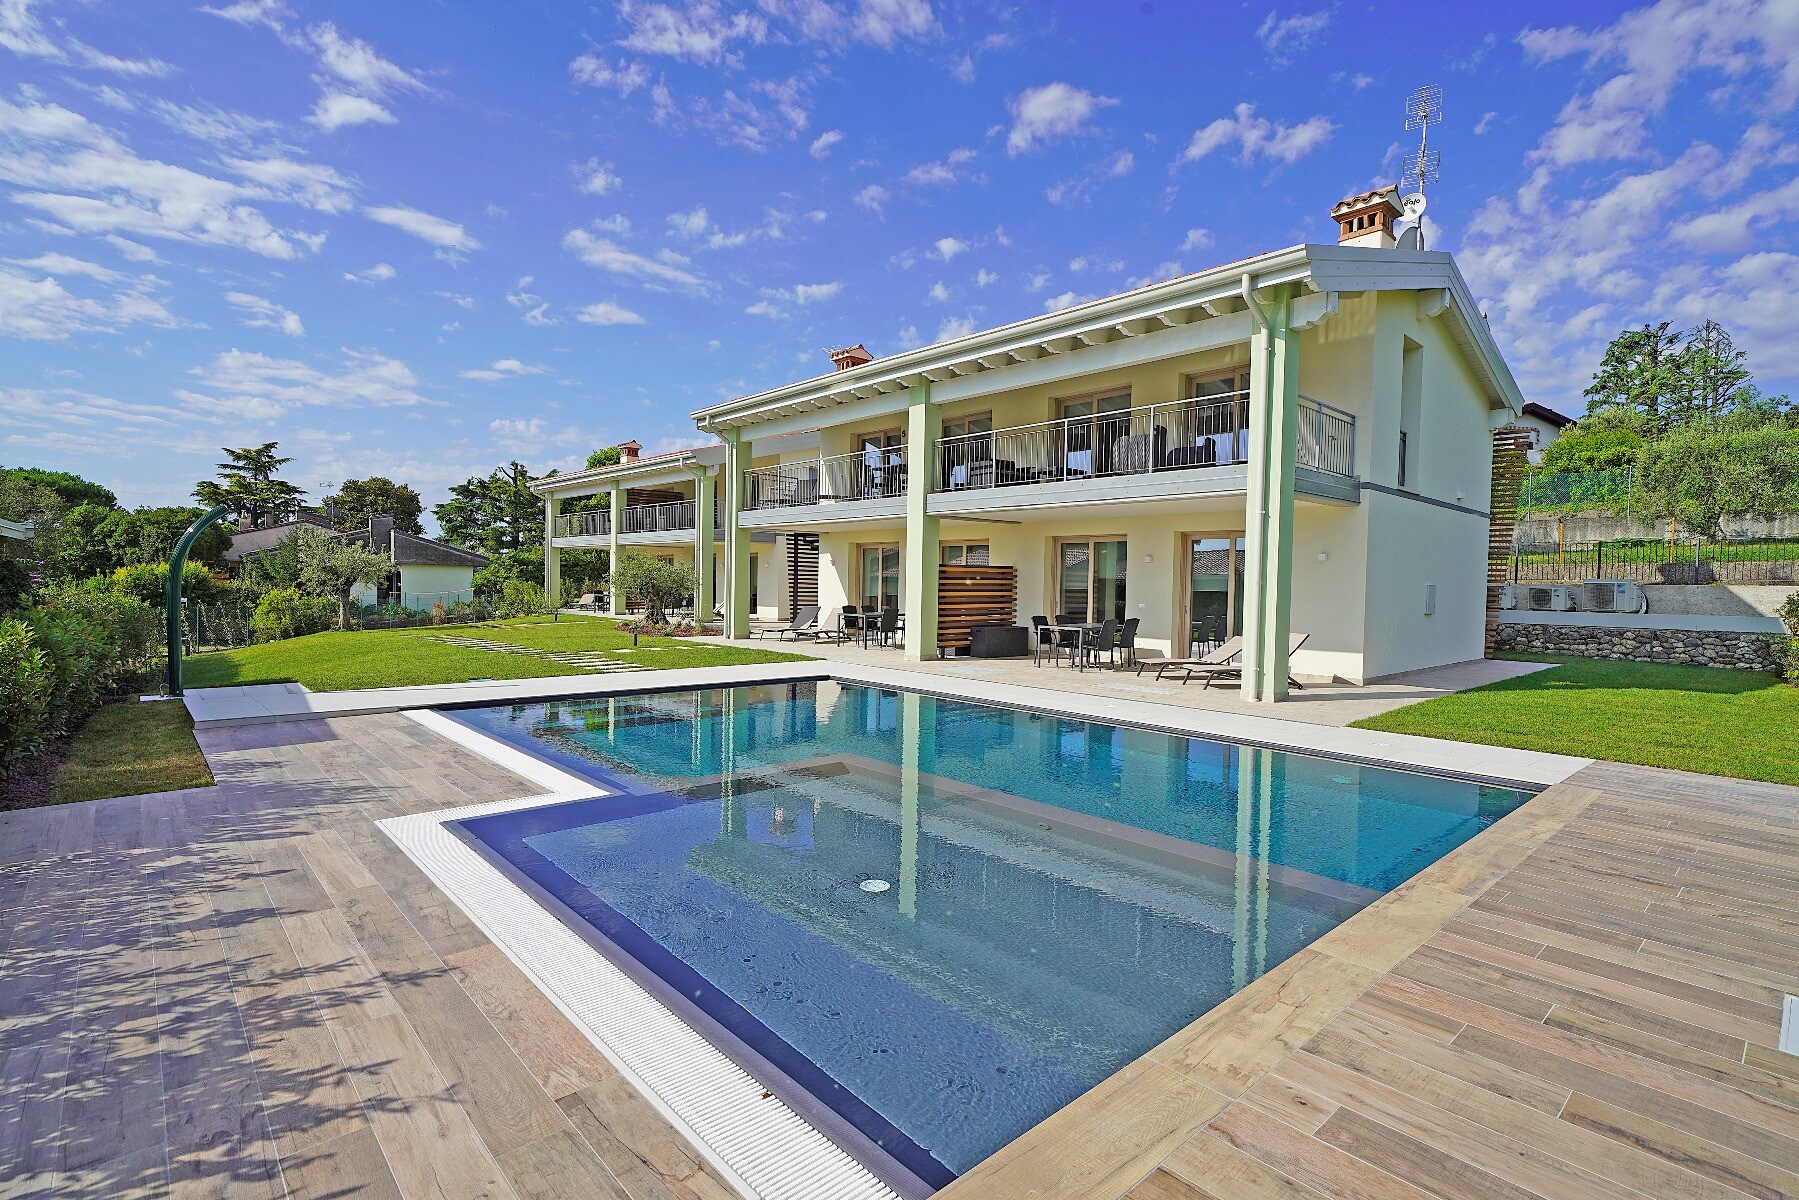 Property Image 1 - Modern and spacious house with pool in Manerba del Garda